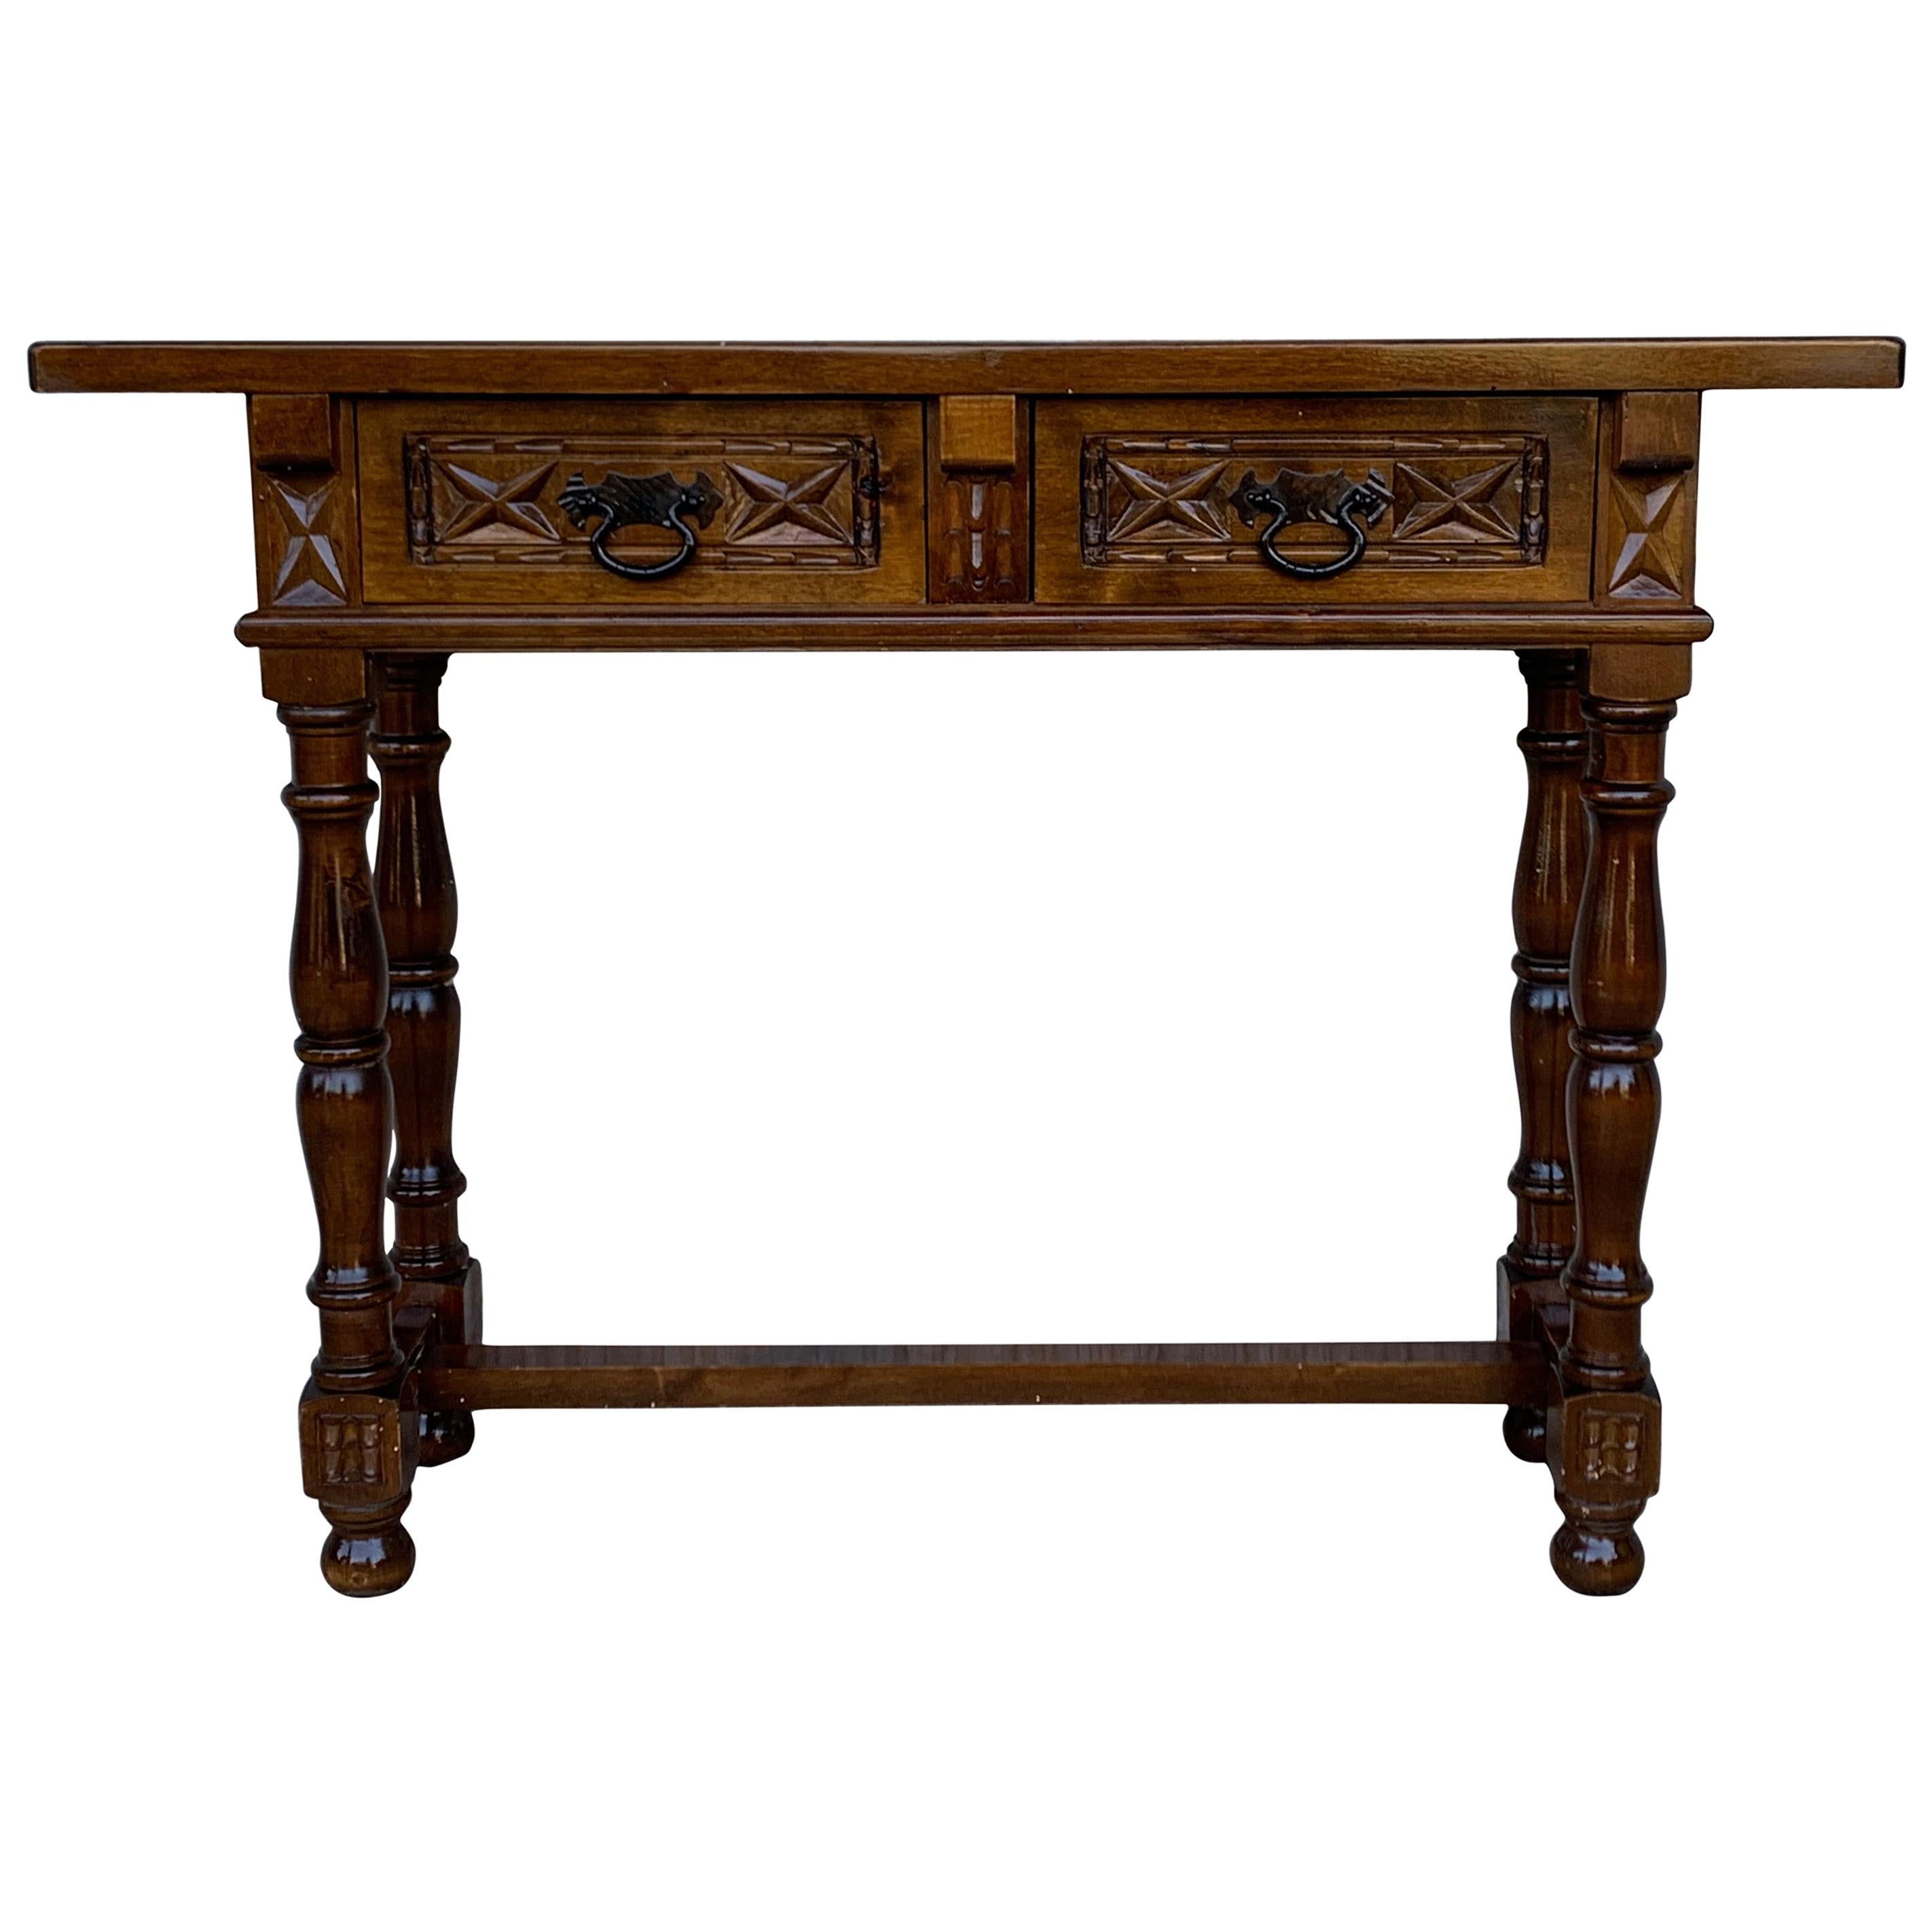 20th Century Spanish Tuscan Console Table with Two Drawers and Turned Legs